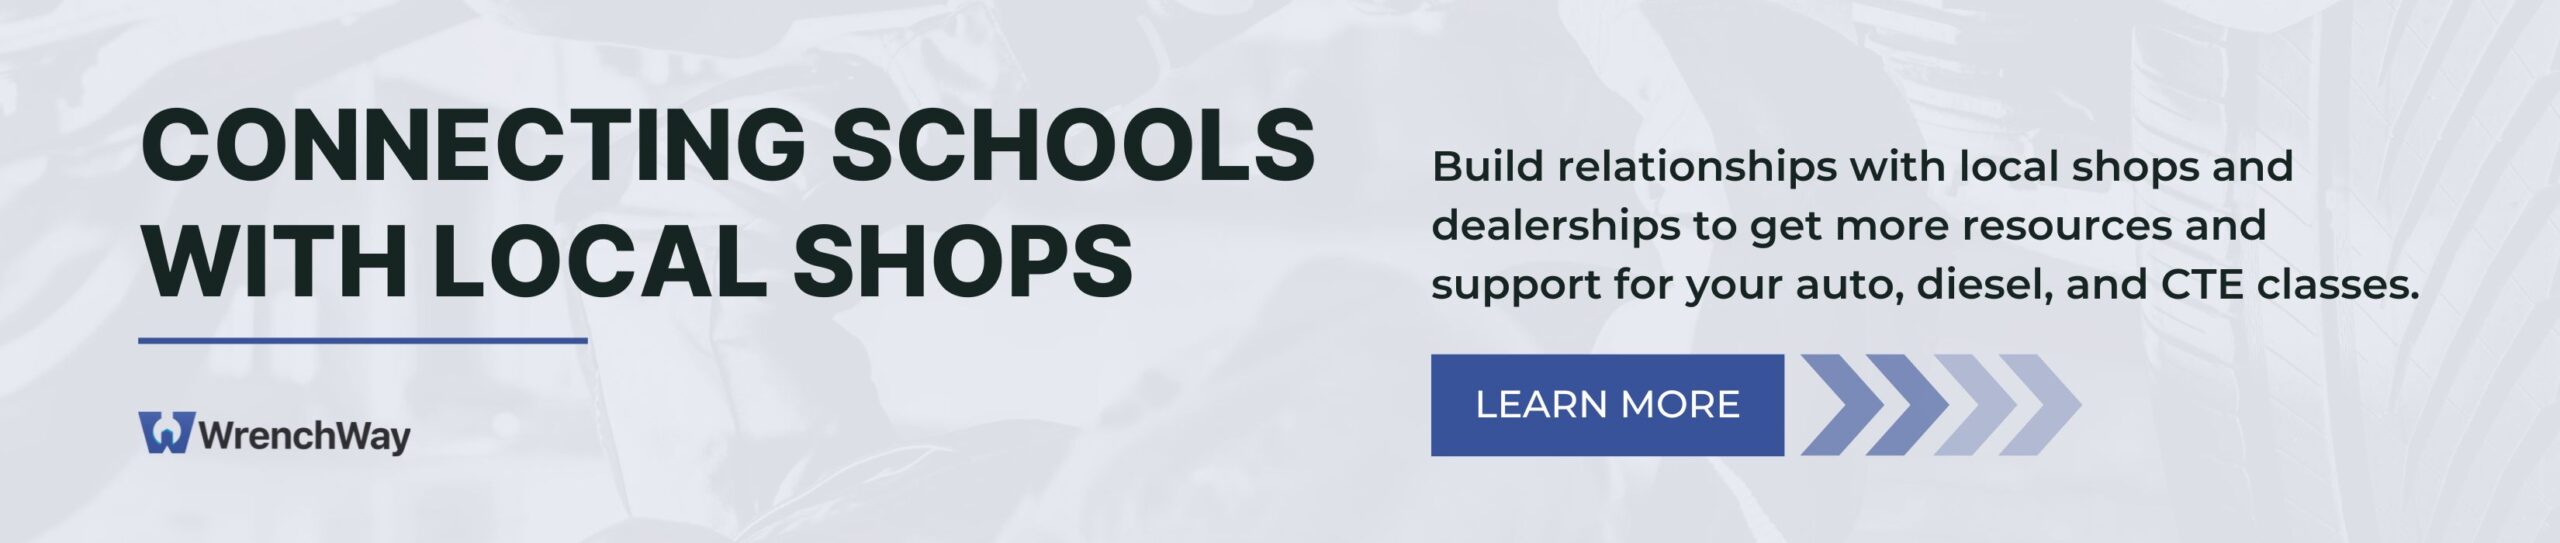 WrenchWay: Connecting Schools with Local Shops